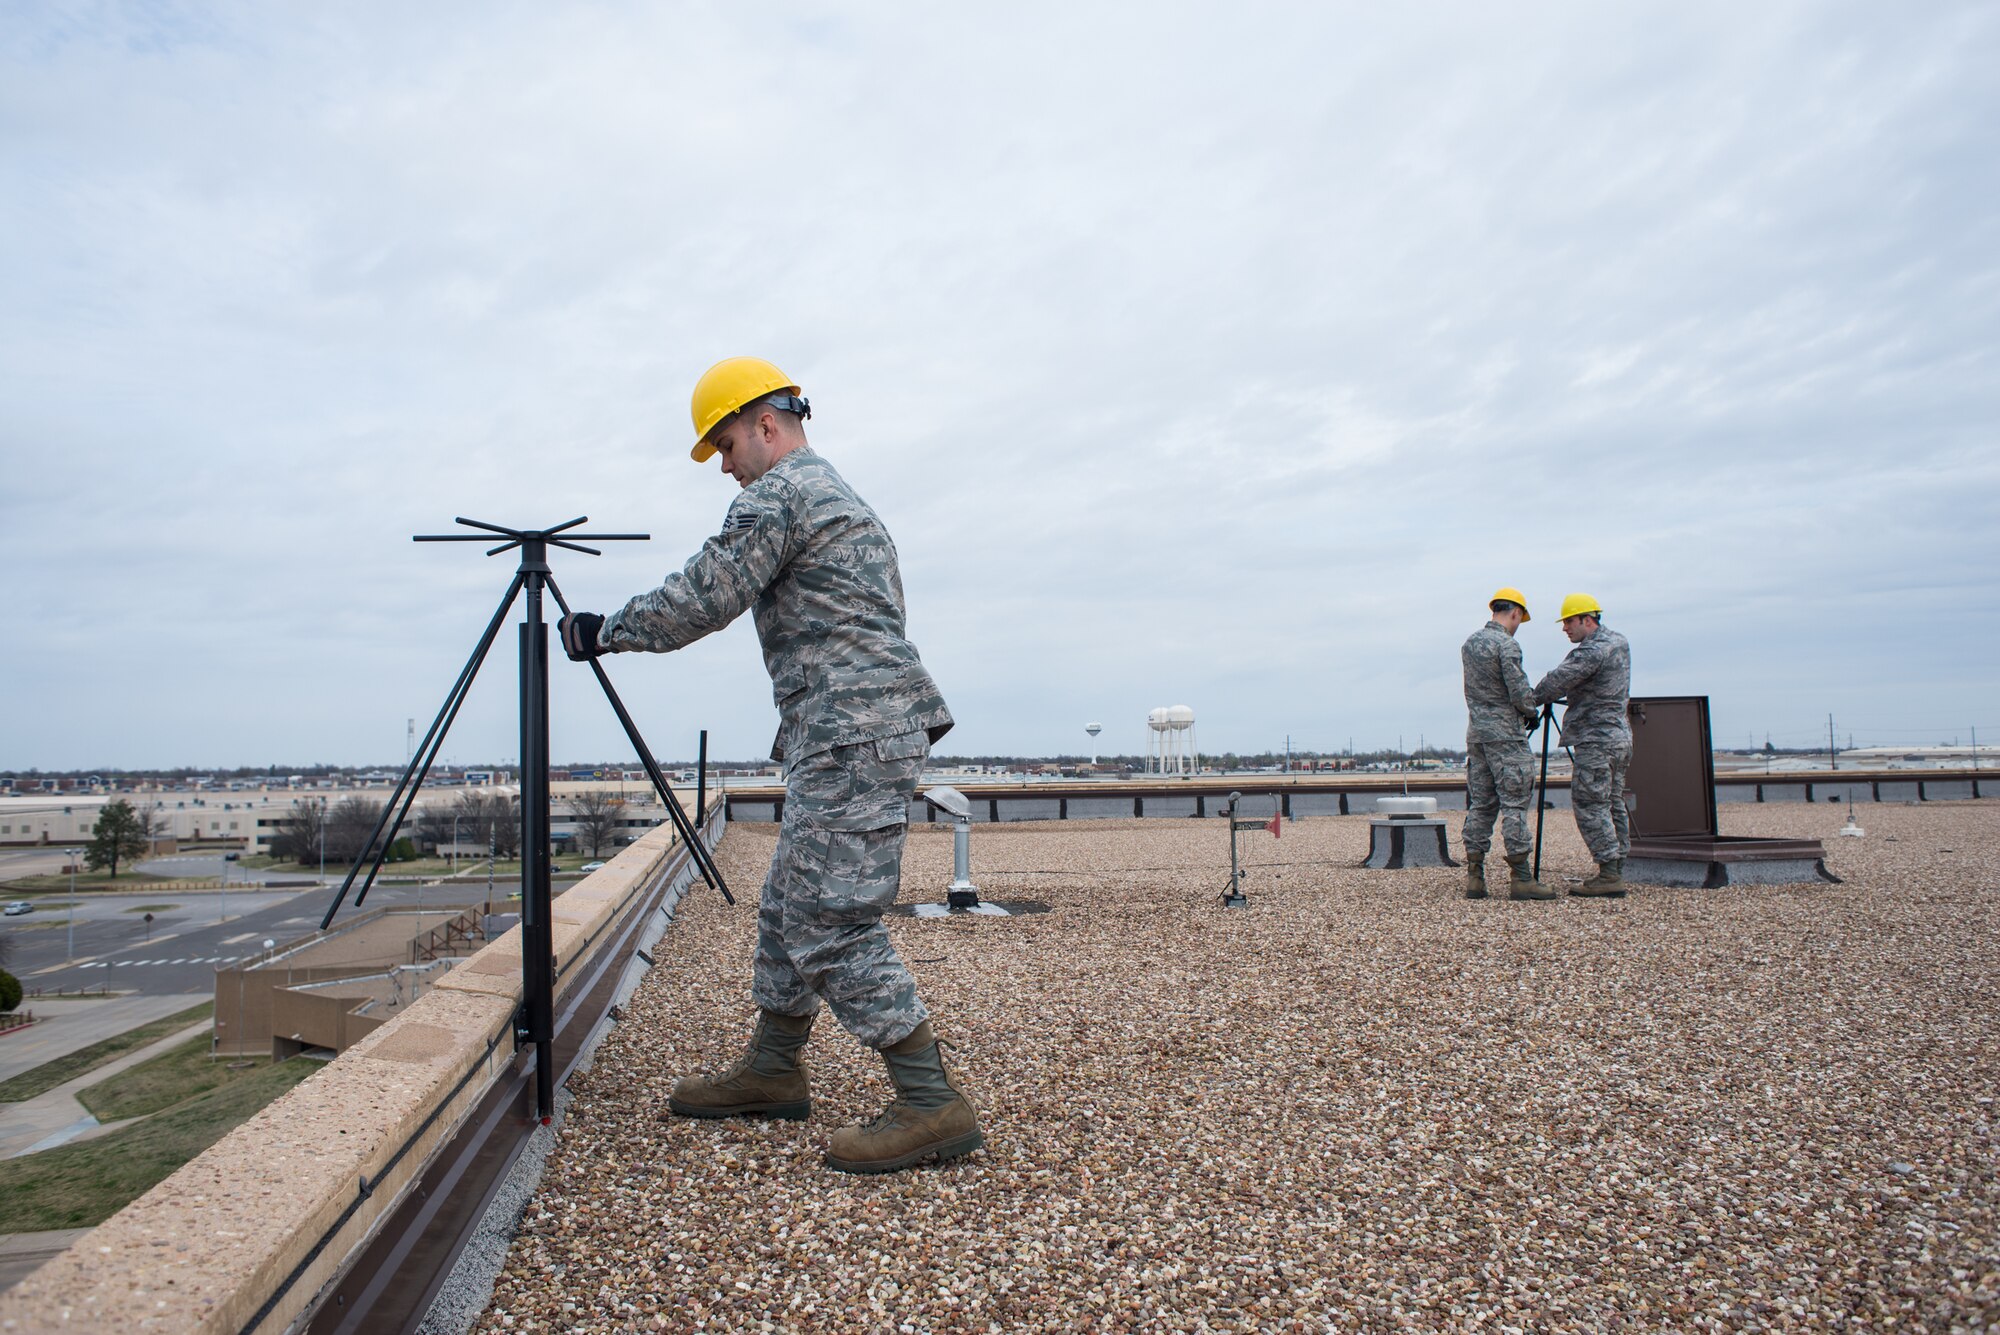 Senior Airman David Hopper, a cable and antenna technician with the 205th Engineering Installation Squadron from Will Rogers Air National Guard Base in Oklahoma City, moves a UVU-200 dual-band base station antenna to its position near a roof’s ledge, March 6, 2016, at Tinker Air Force Base in Oklahoma City. Hopper was a part of one of the two teams from the 205 EIS guard unit that worked to setup and repair antennas for active-duty squadrons at Tinker AFB.